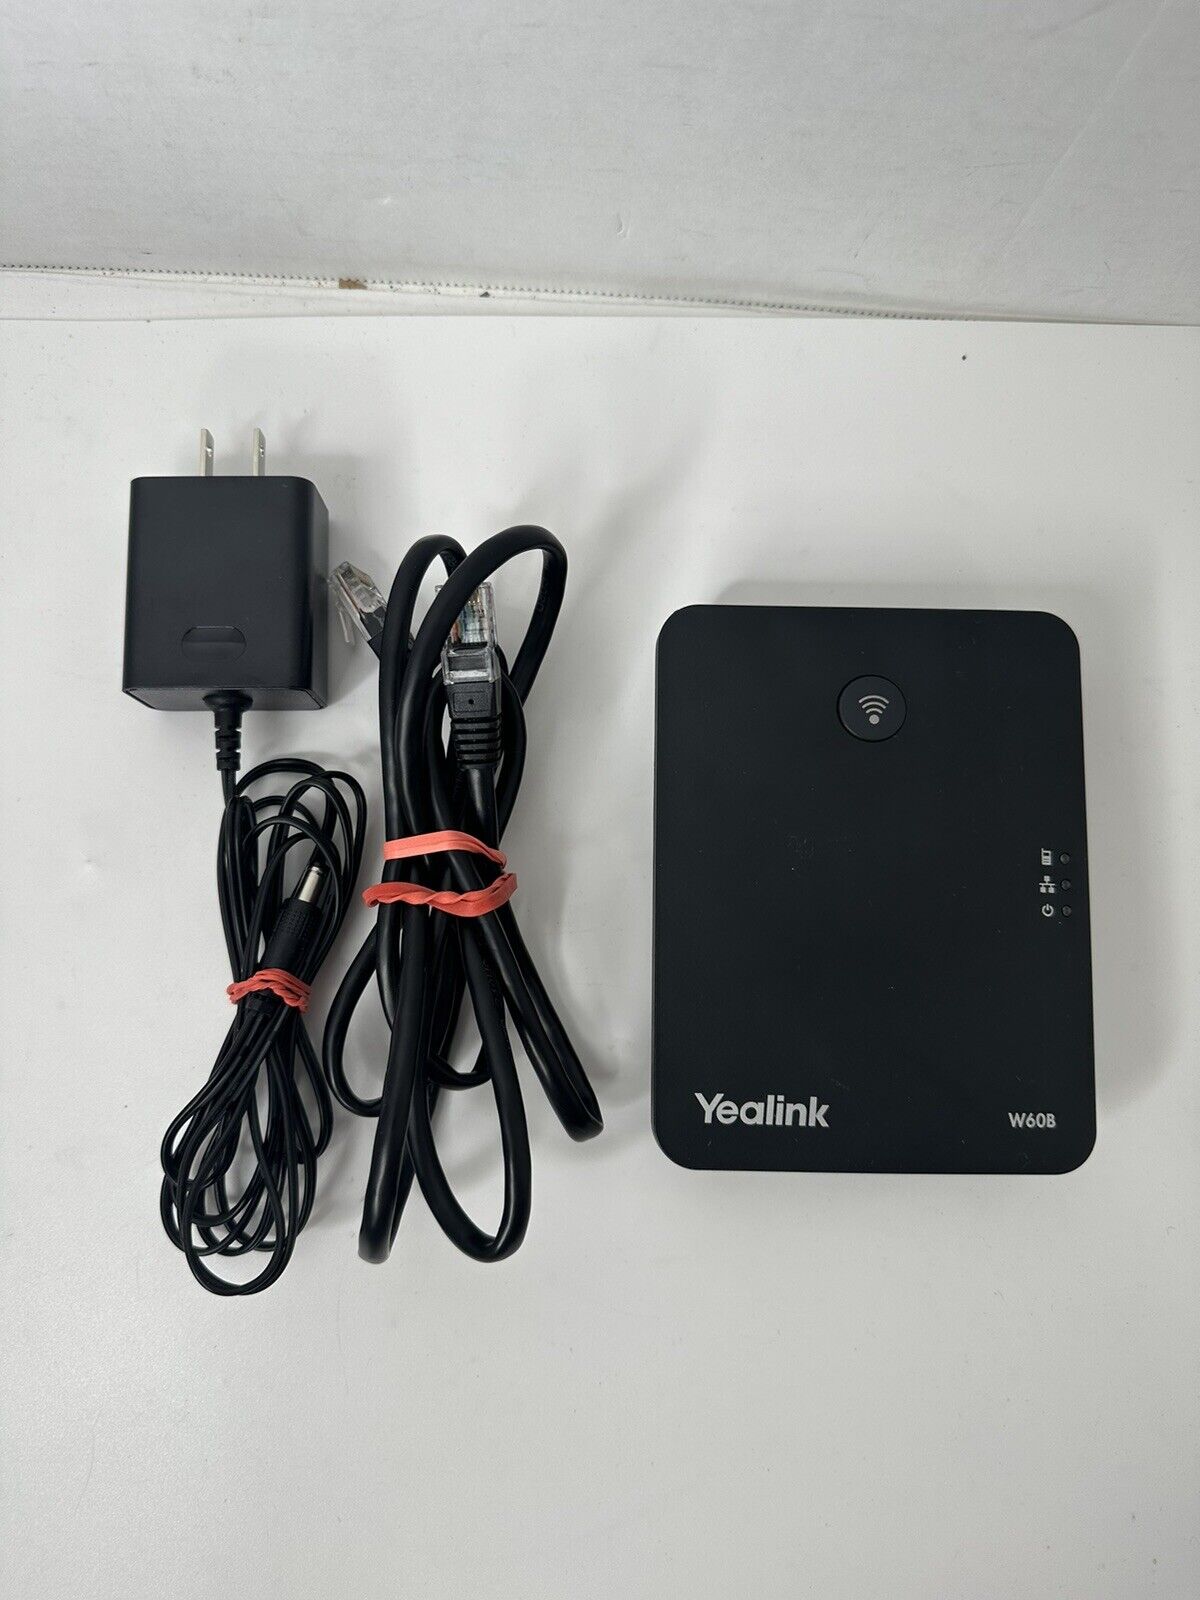 Yealink W60B DECT IP Base Station for Yealink IP DECT Phone w/power adapter